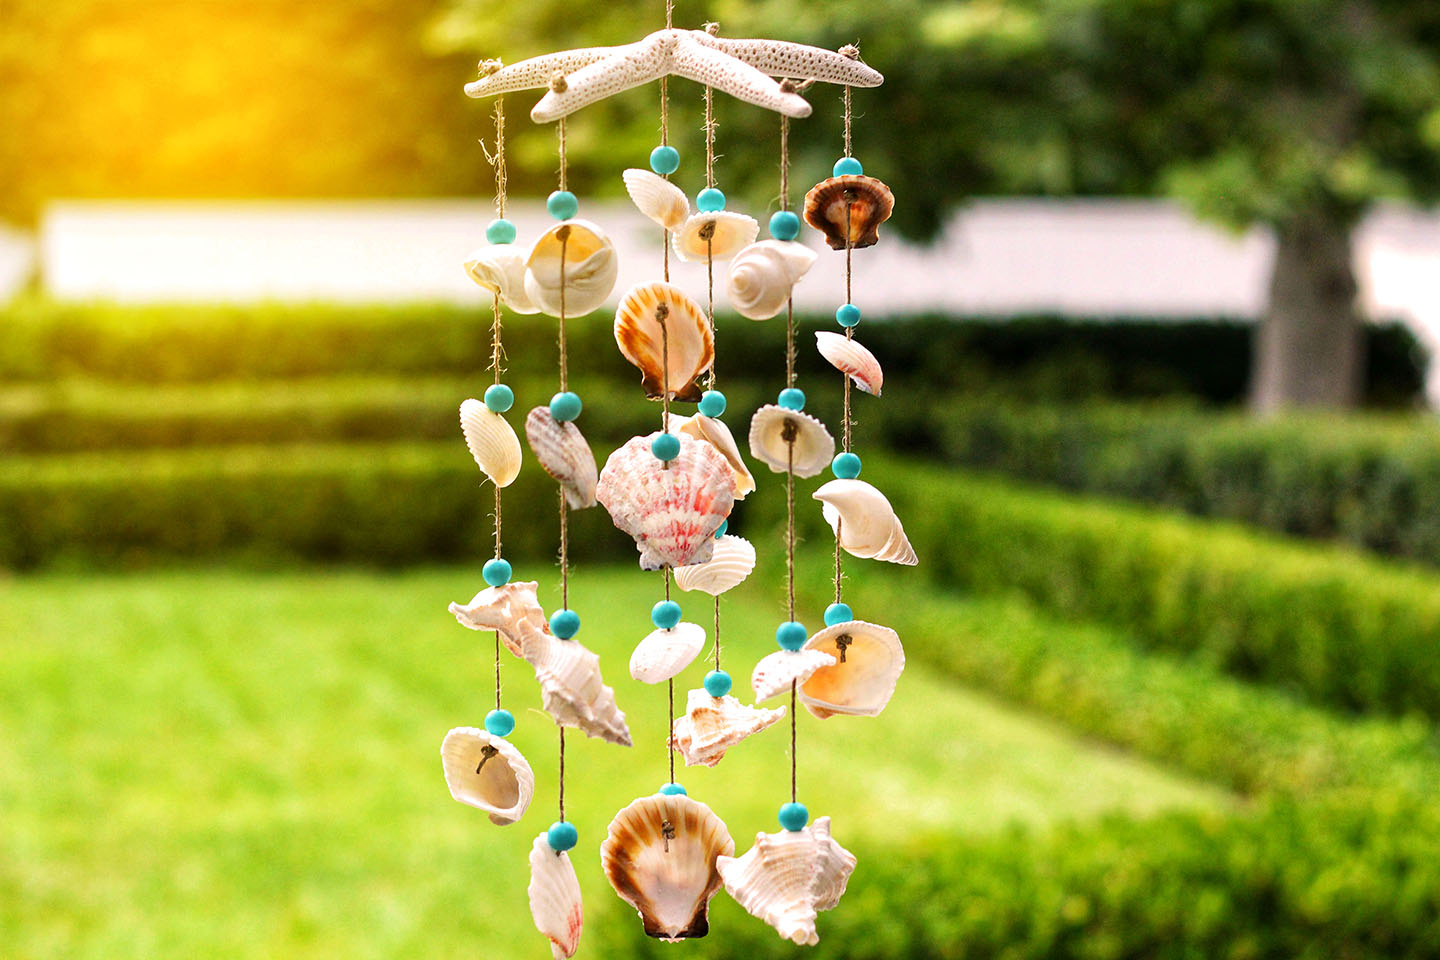 How To Make A Seashell Wind Chime